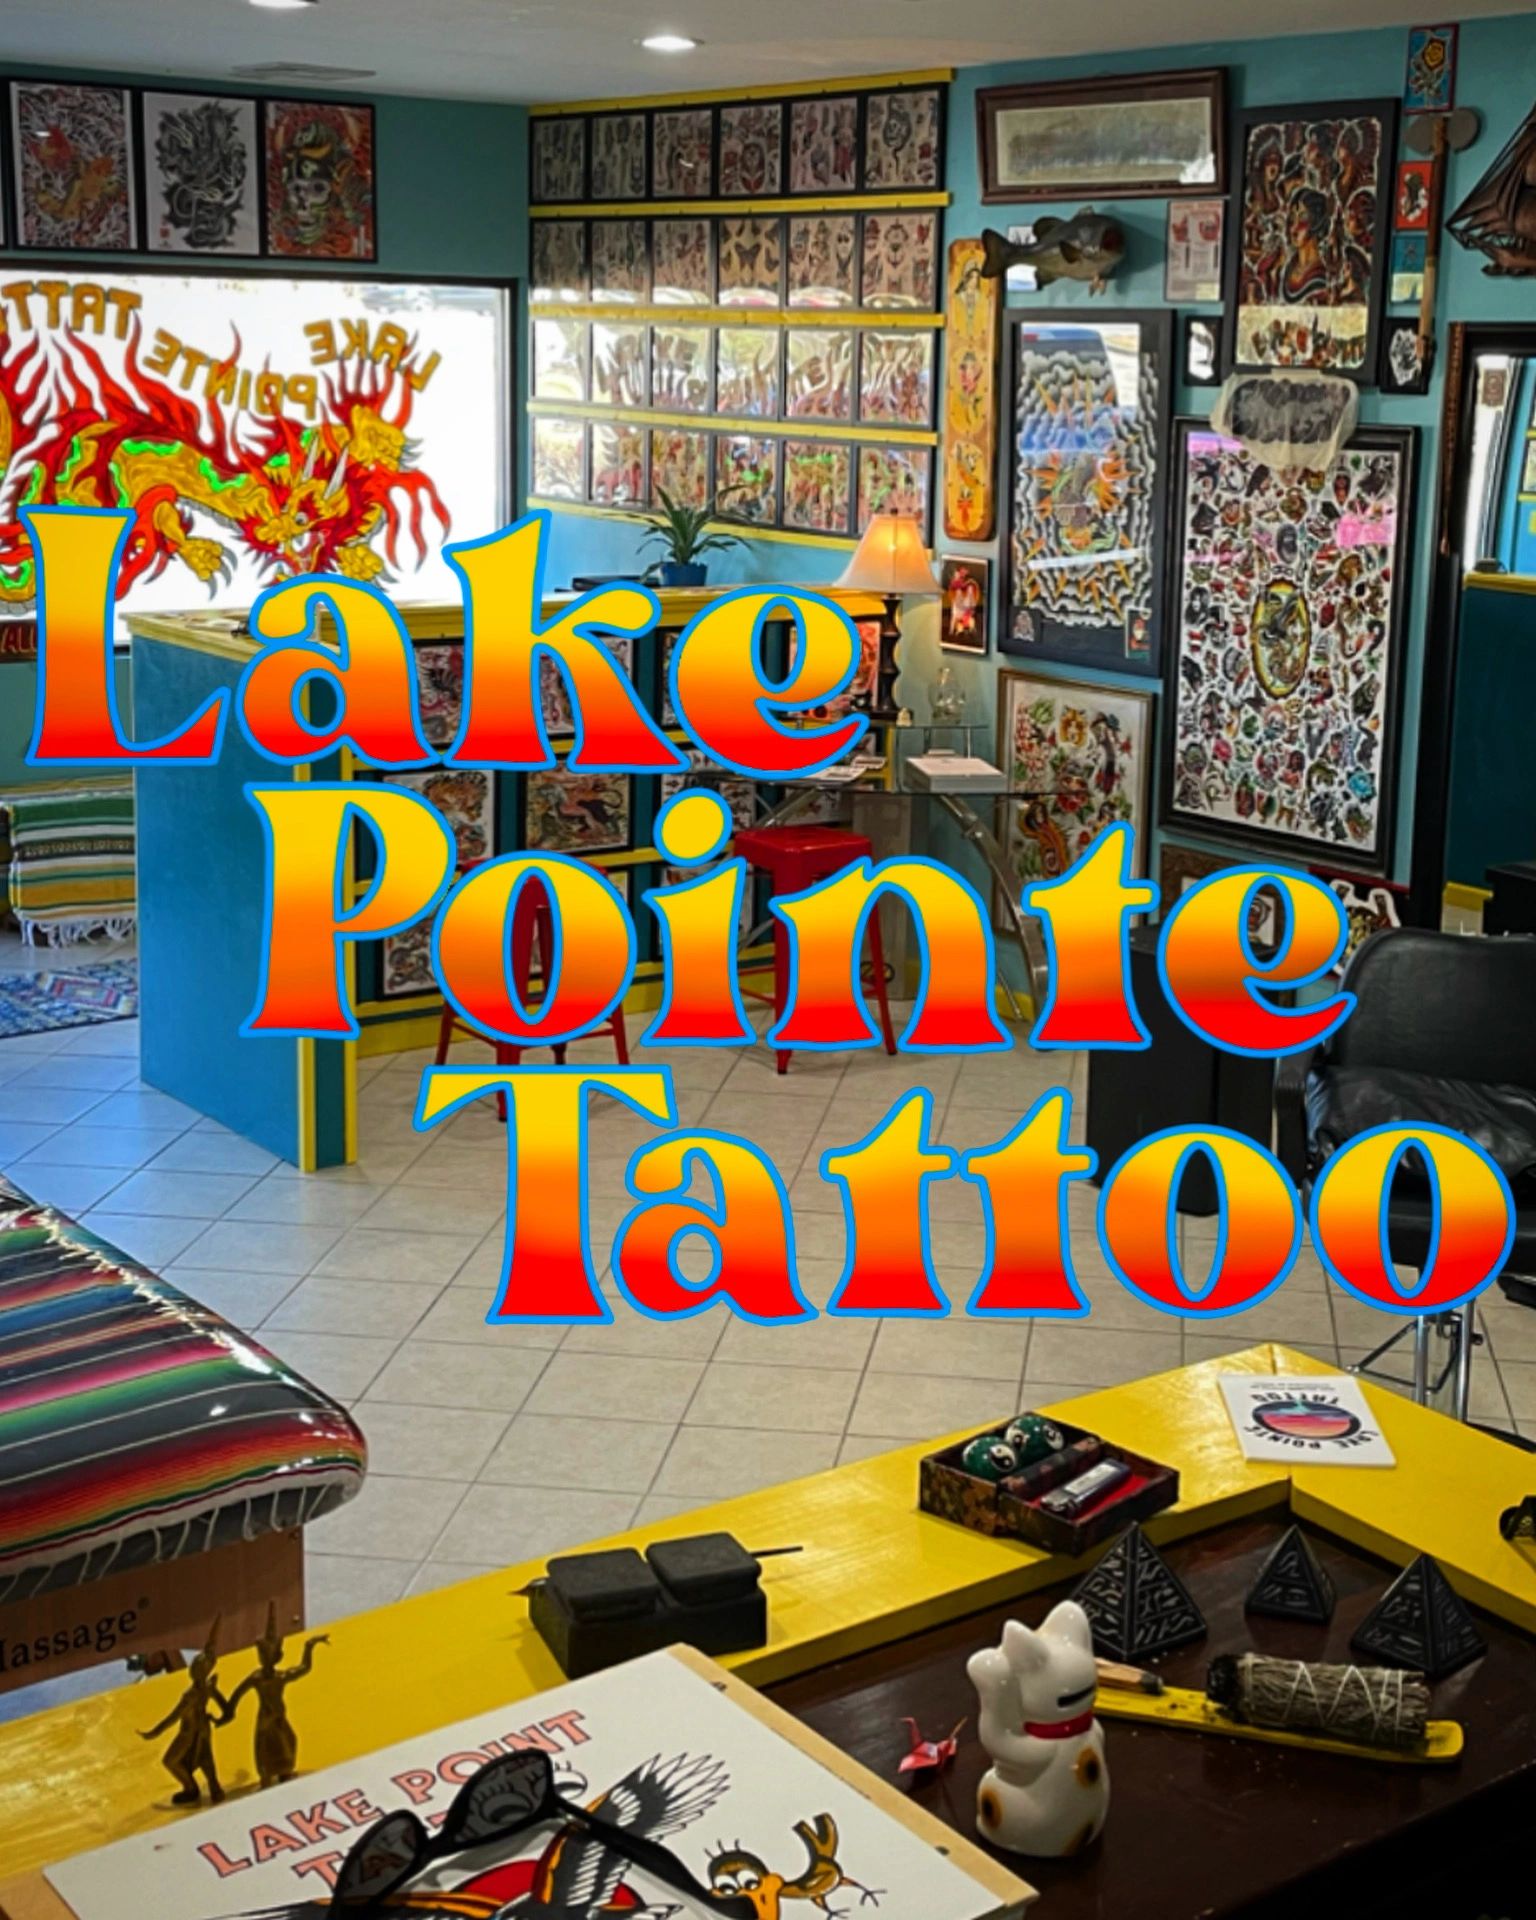 Tattoo Envy 3150 Atlanta Highway Gainesville Reviews and Appointments   GetInked